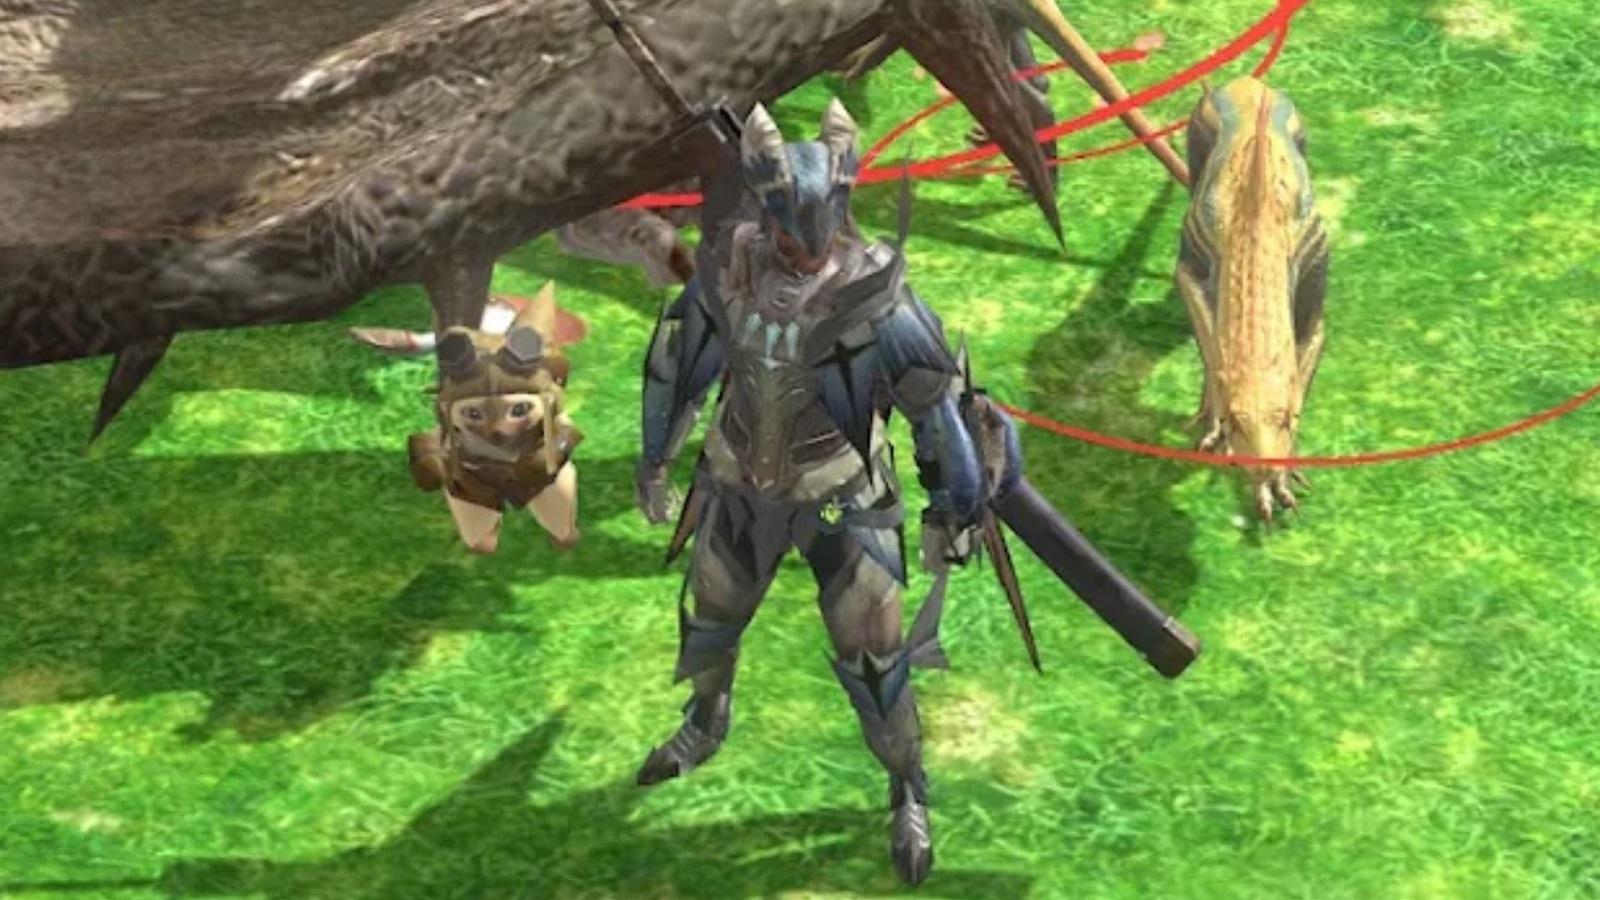 Solo Monster Hunter Now players furious over “impossible” Hunt-a